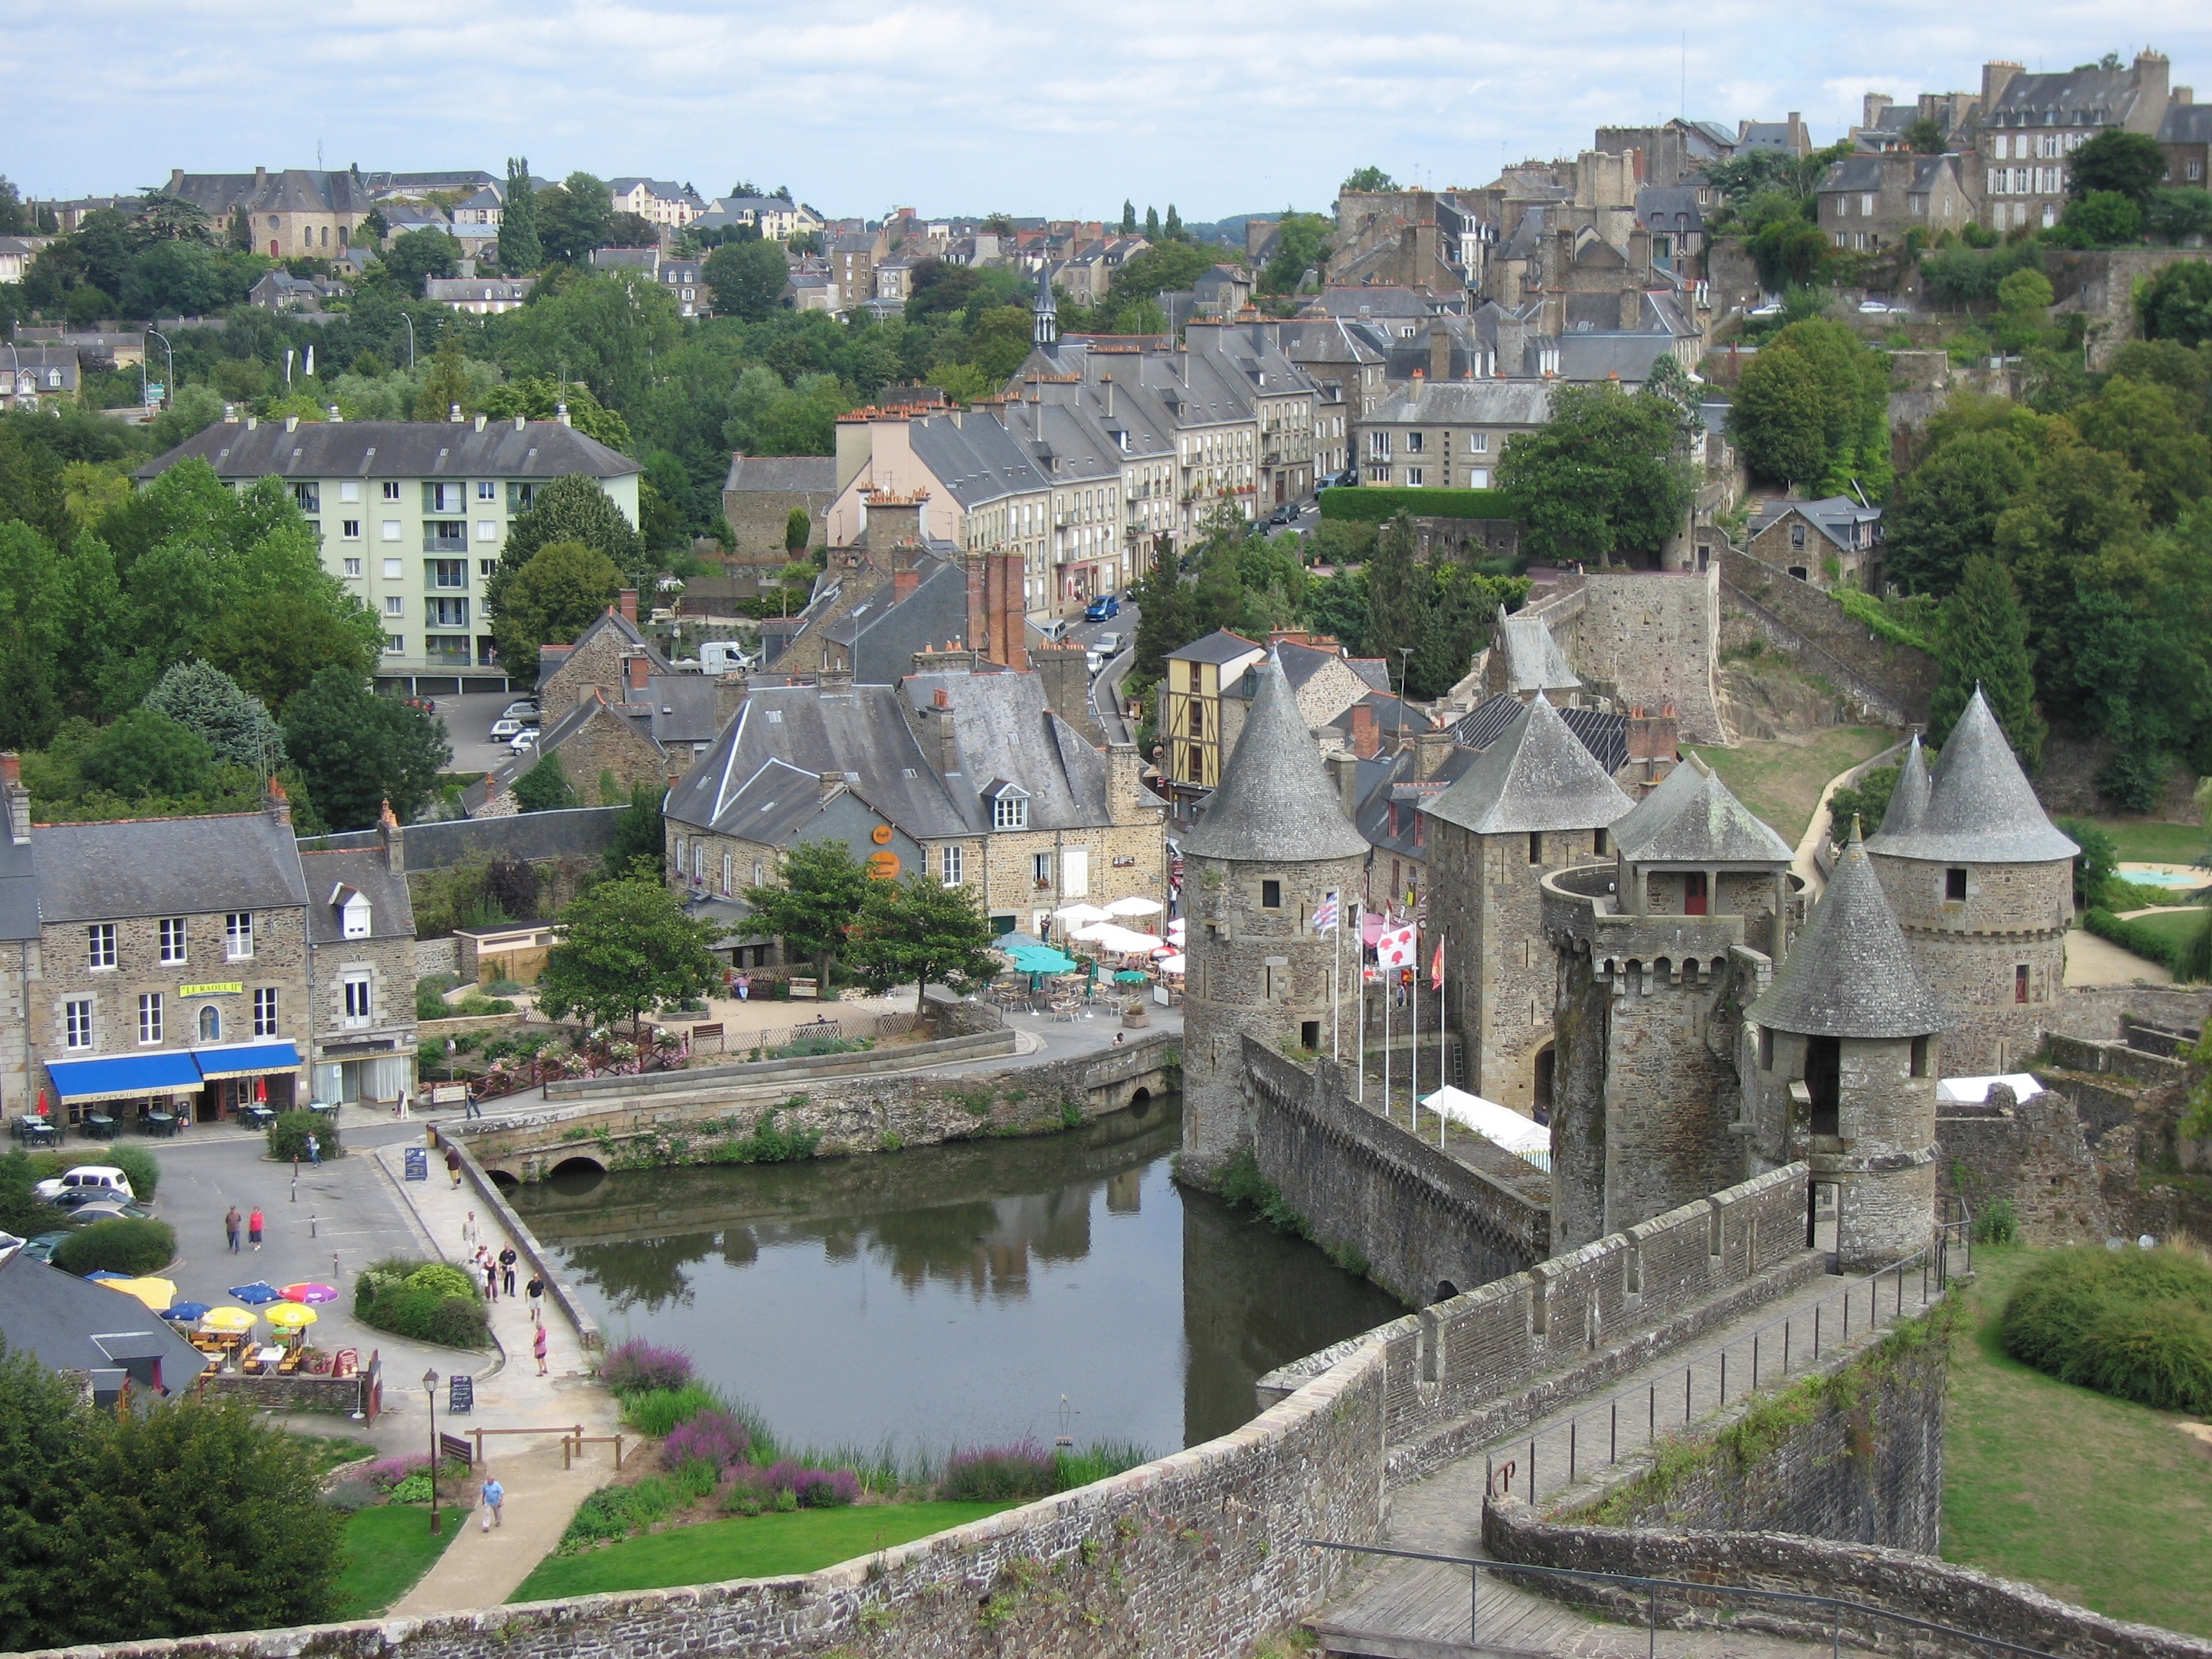 View from turret overlooking the town of Fougères